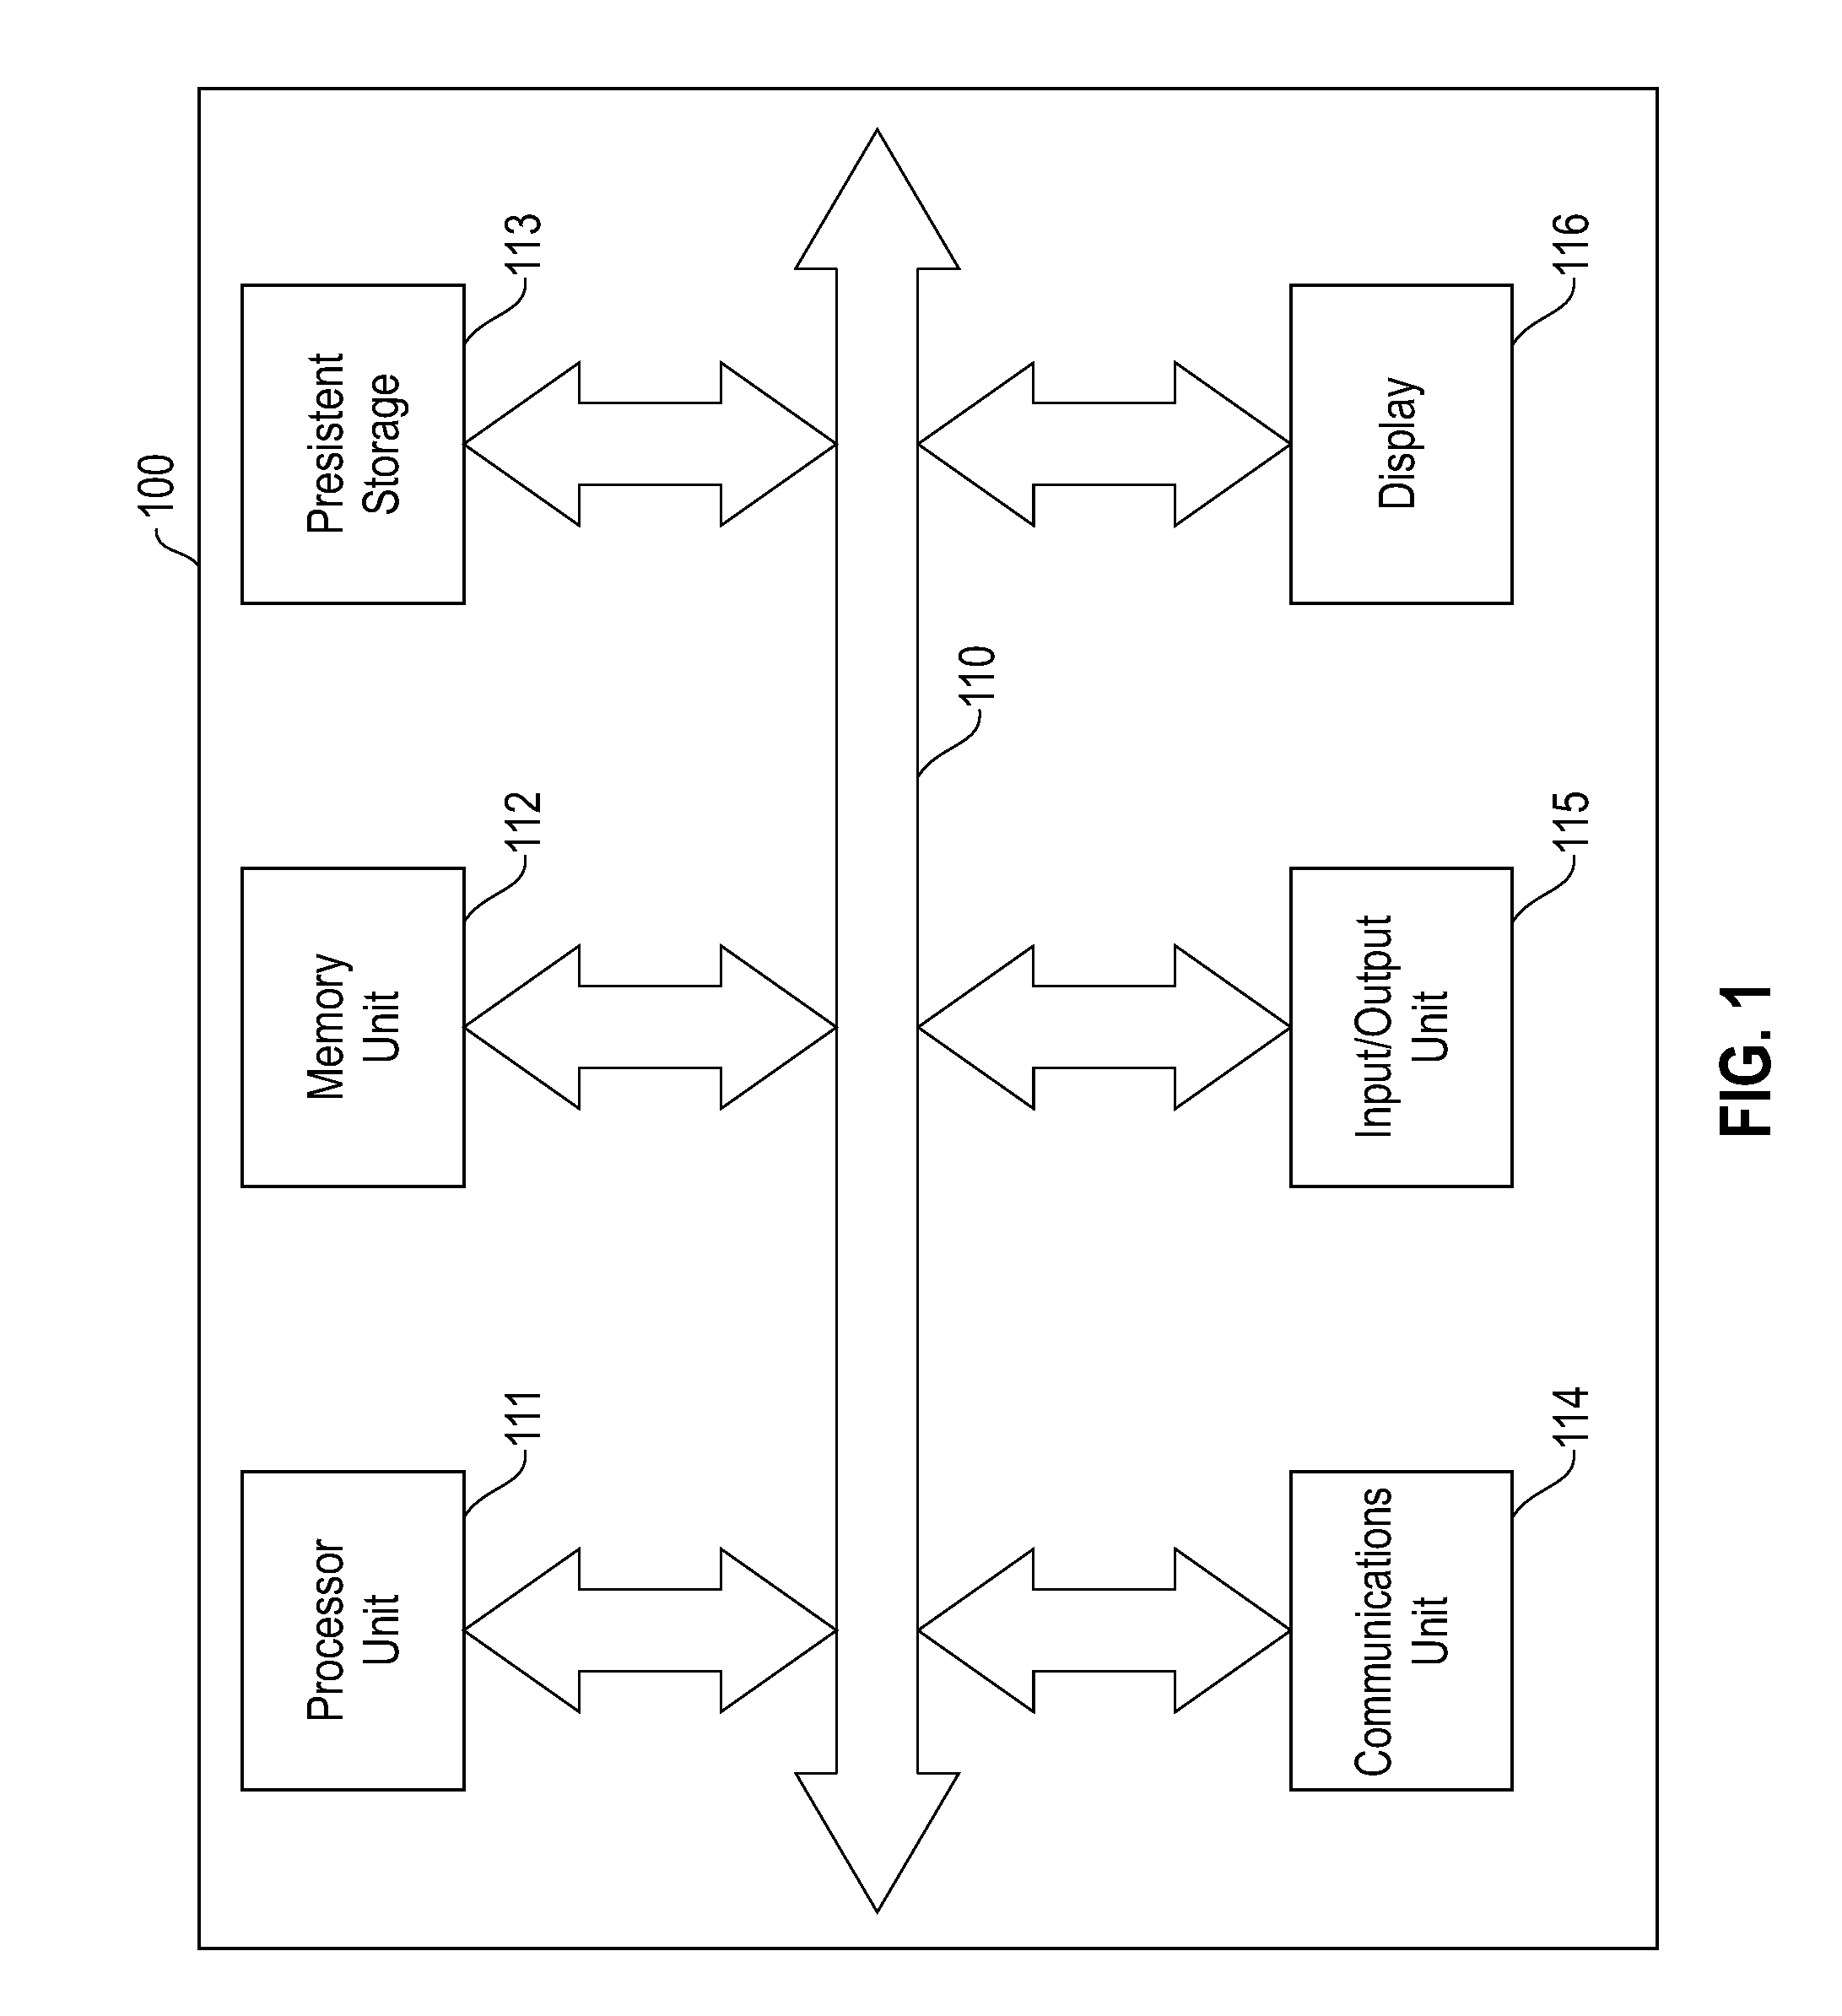 High-availability computer cluster with failover support based on a resource map